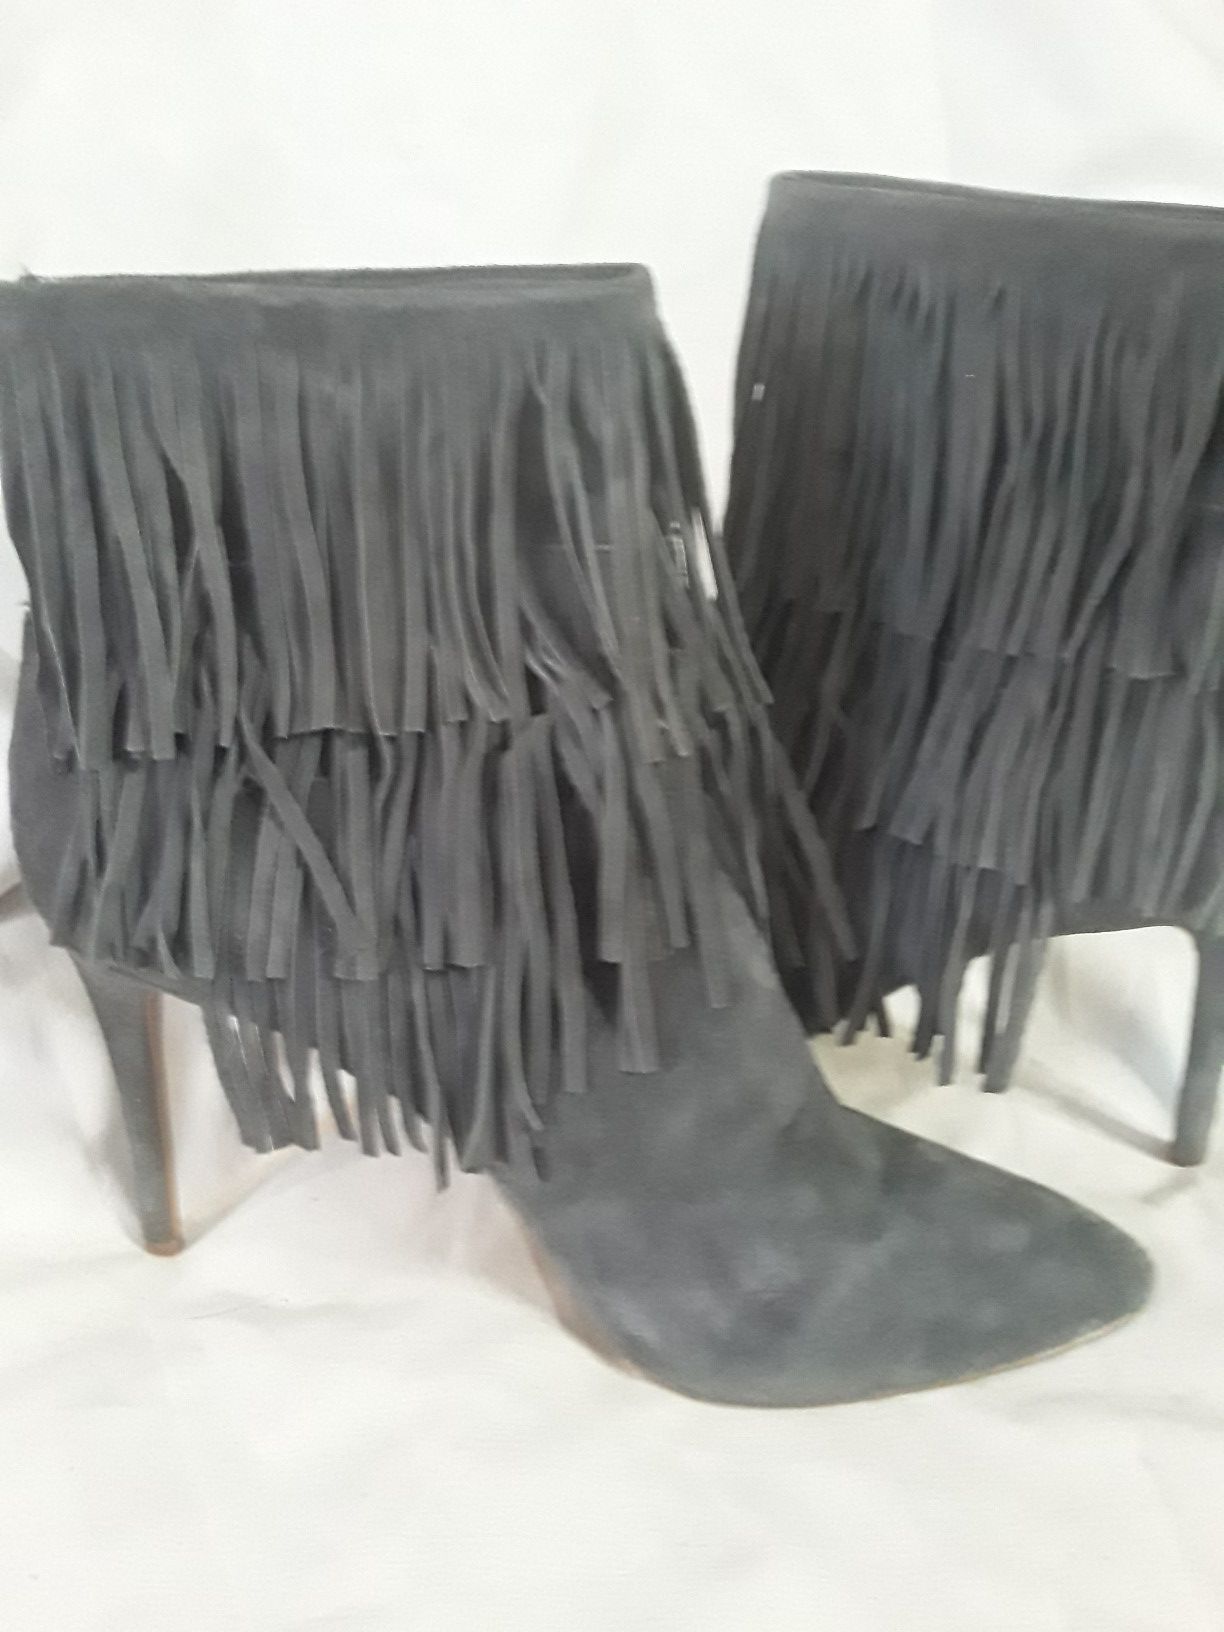 Size 11 suade heeled boots with fringe/tassels charcoal grey